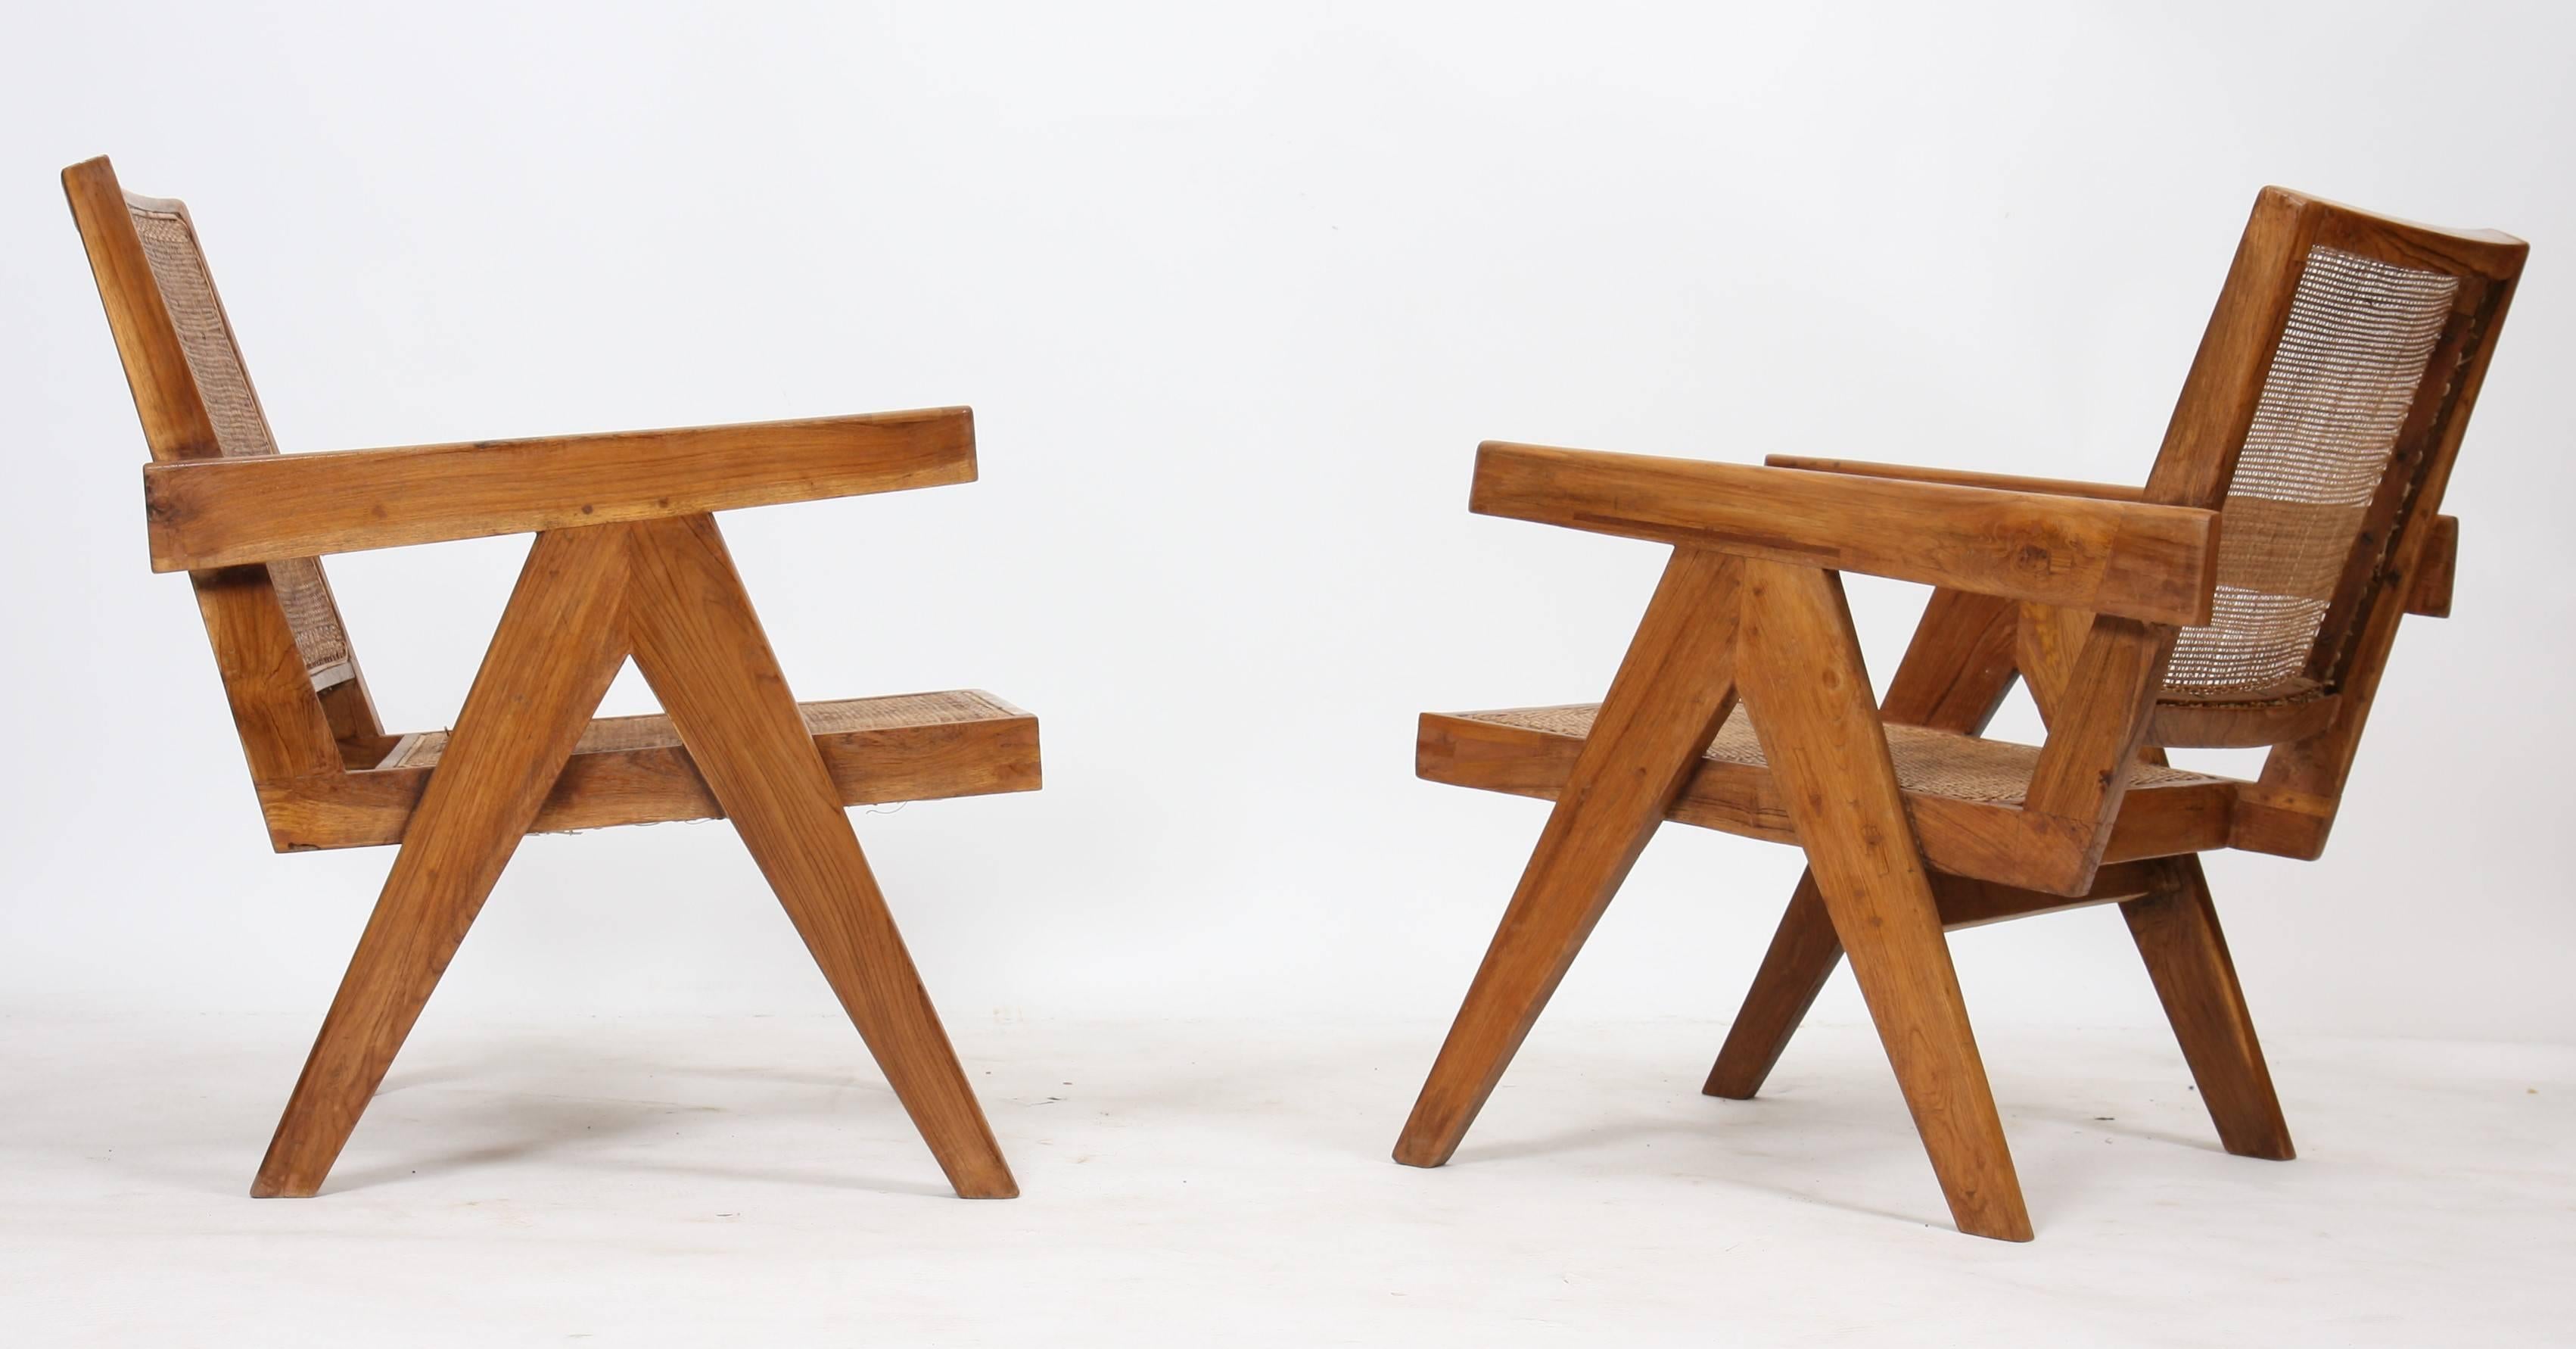 Pierre Jeanneret (1896-1967), set of two easy armchairs.
In teak with profiled and slightly curved backrests and bent seat.
Detected and profiled armrests and side compass design legs.
Cane seat and backrests.
Slight difference from one chair to